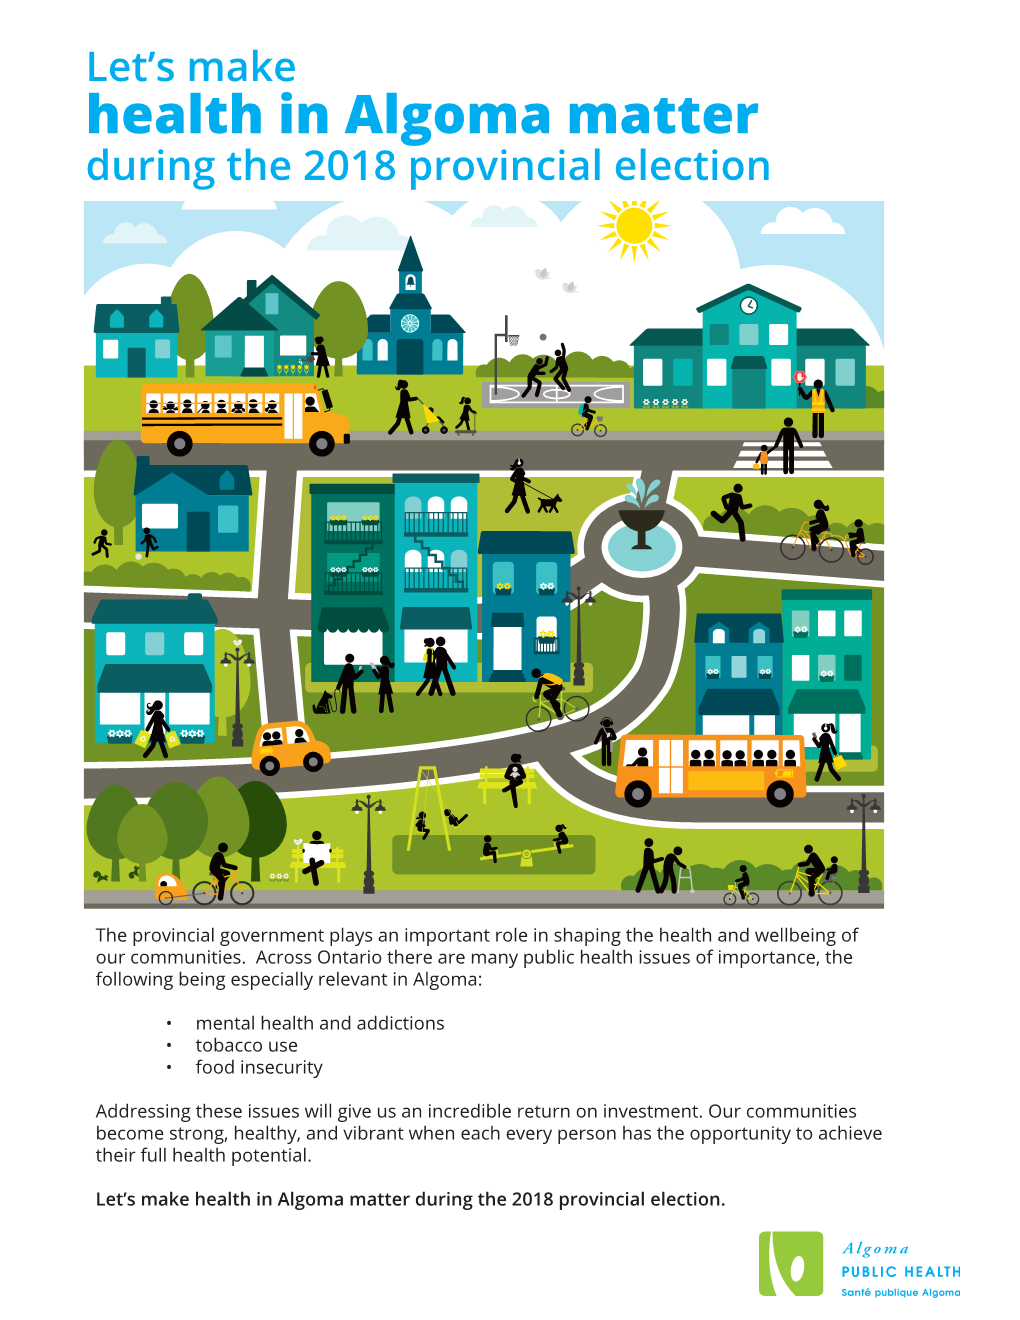 Health in Algoma Matter During the 2018 Provincial Election